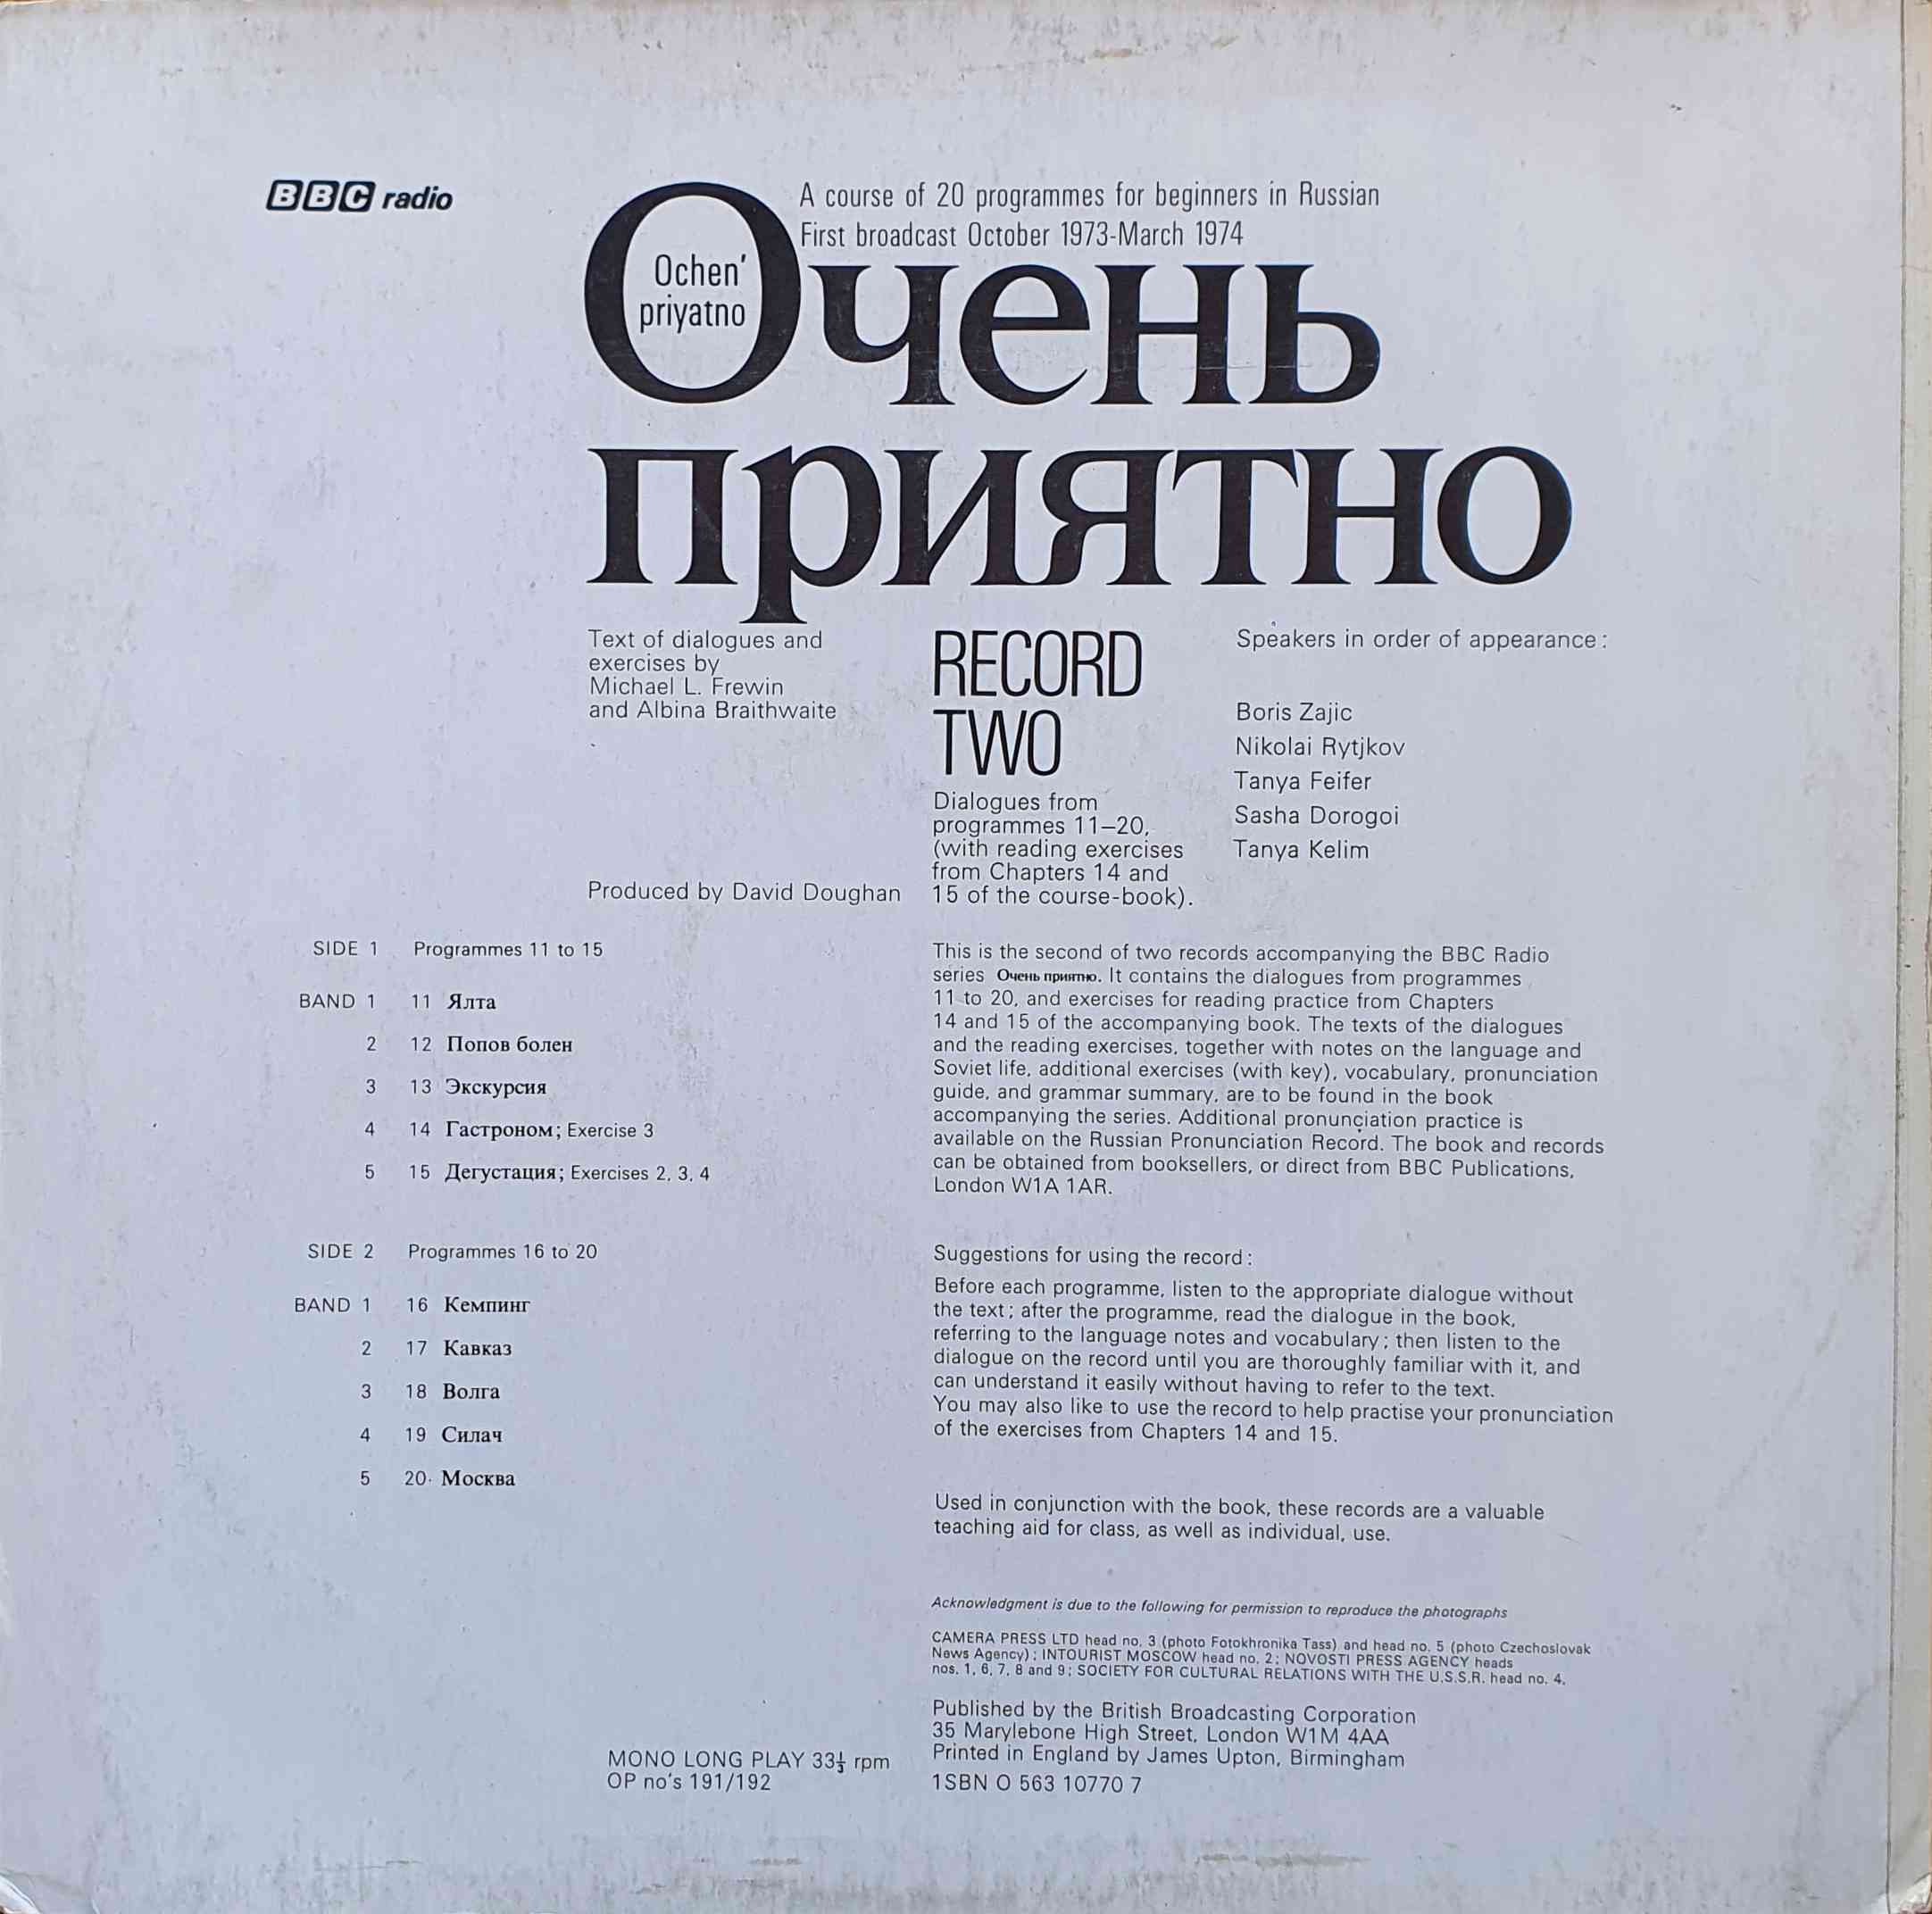 Picture of OP 191/192 Ochen' priyatno Record 2 - A BBC Radio course for beginners in Russian - Record 2 - Programmes 11 - 20 by artist Michael L. Frewin / Albina Braithwaite from the BBC records and Tapes library